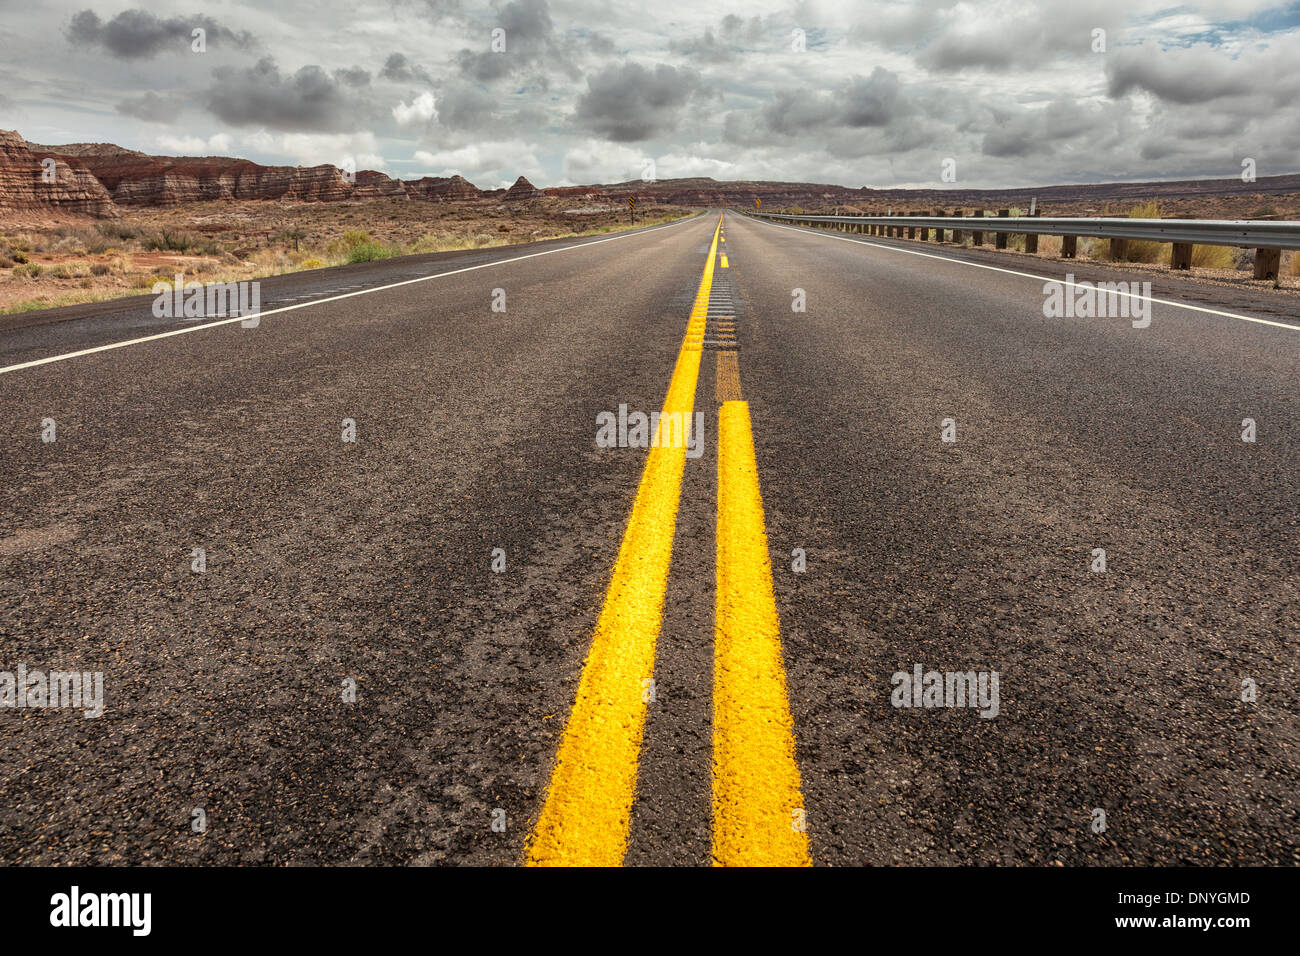 Route U.S Highway 89 South West, Utah, USA Banque D'Images